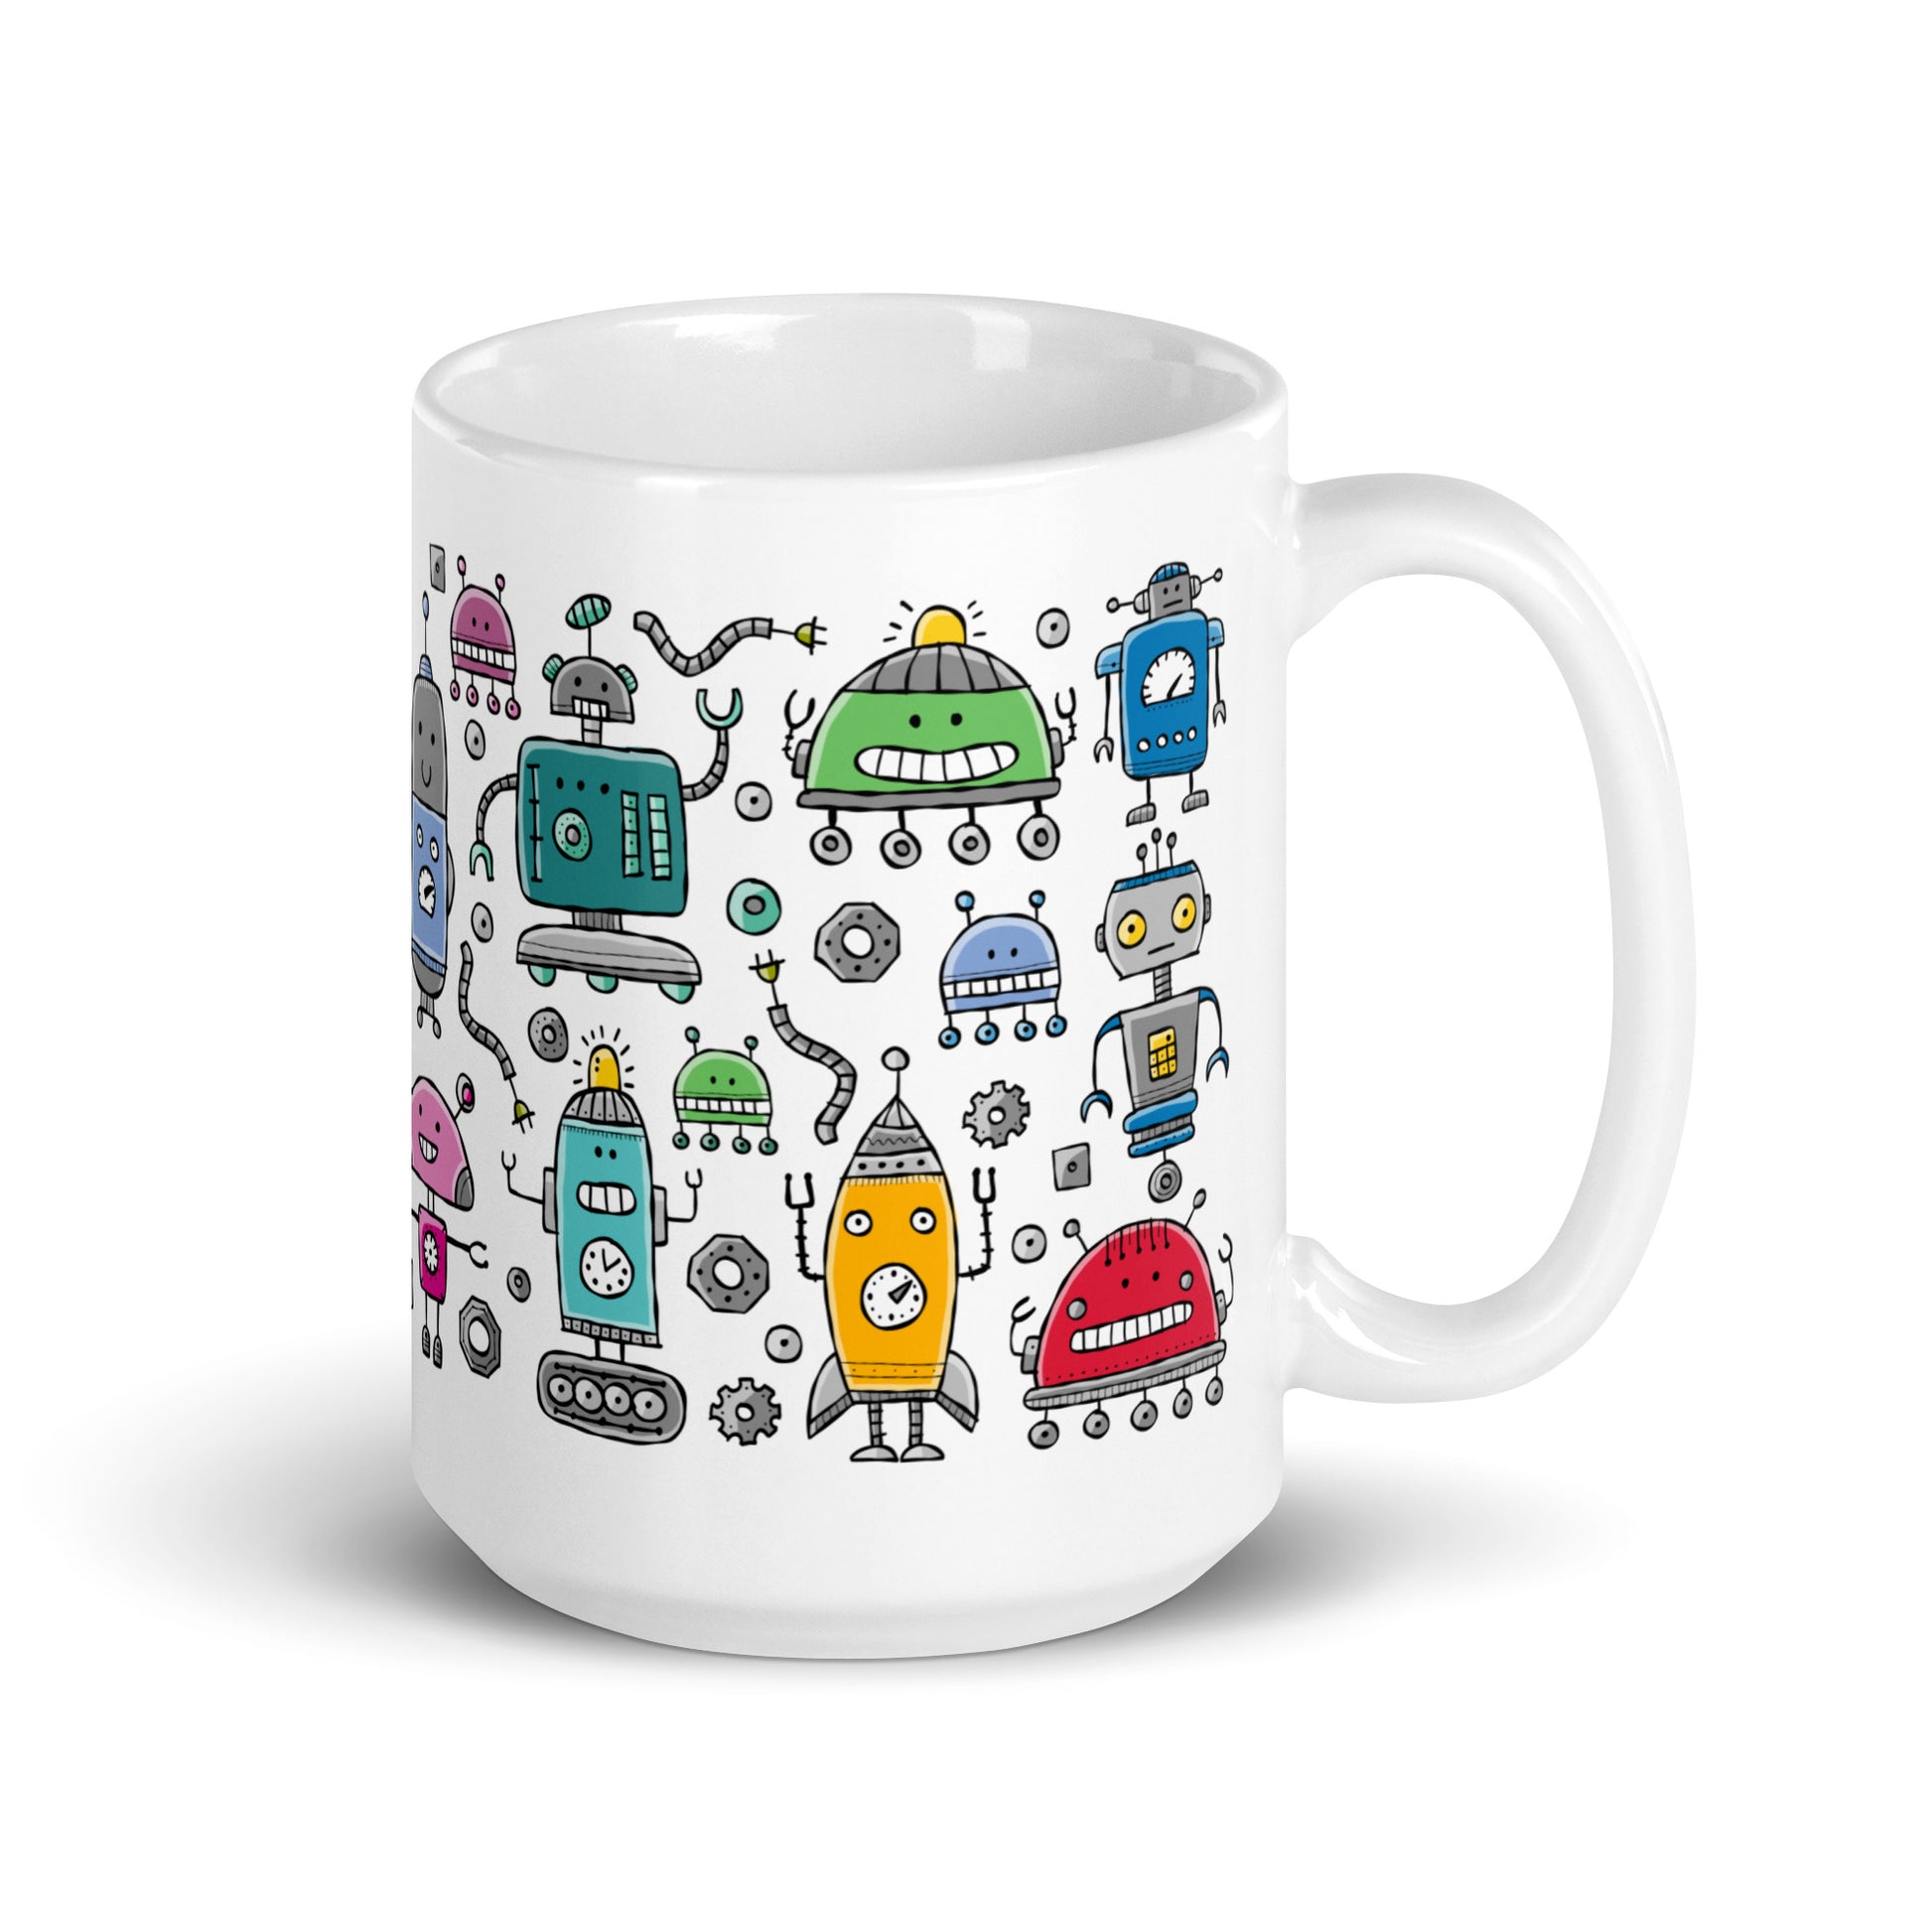 A white ceramic 15oz mug with a collection of colorful and comical robots, perfect for adding joy and laughter to your morning routine